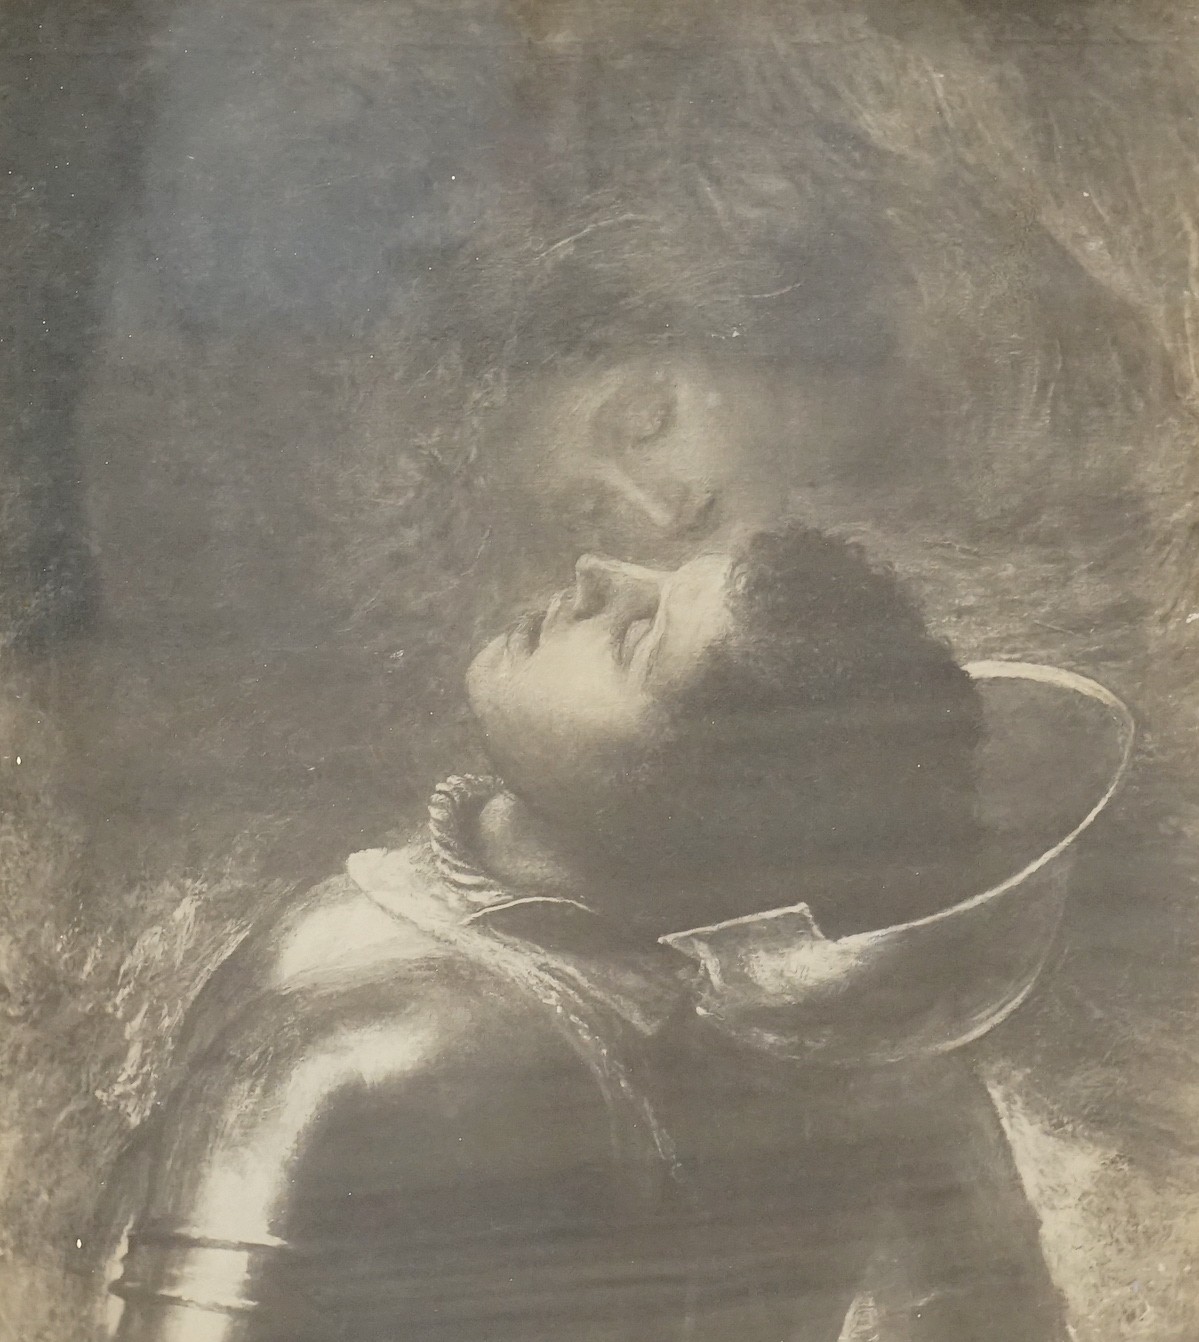 After George Frederic Watts RA (1817-1904), photogravure, 'The Happy Warrior 1884', 47 x 39cm